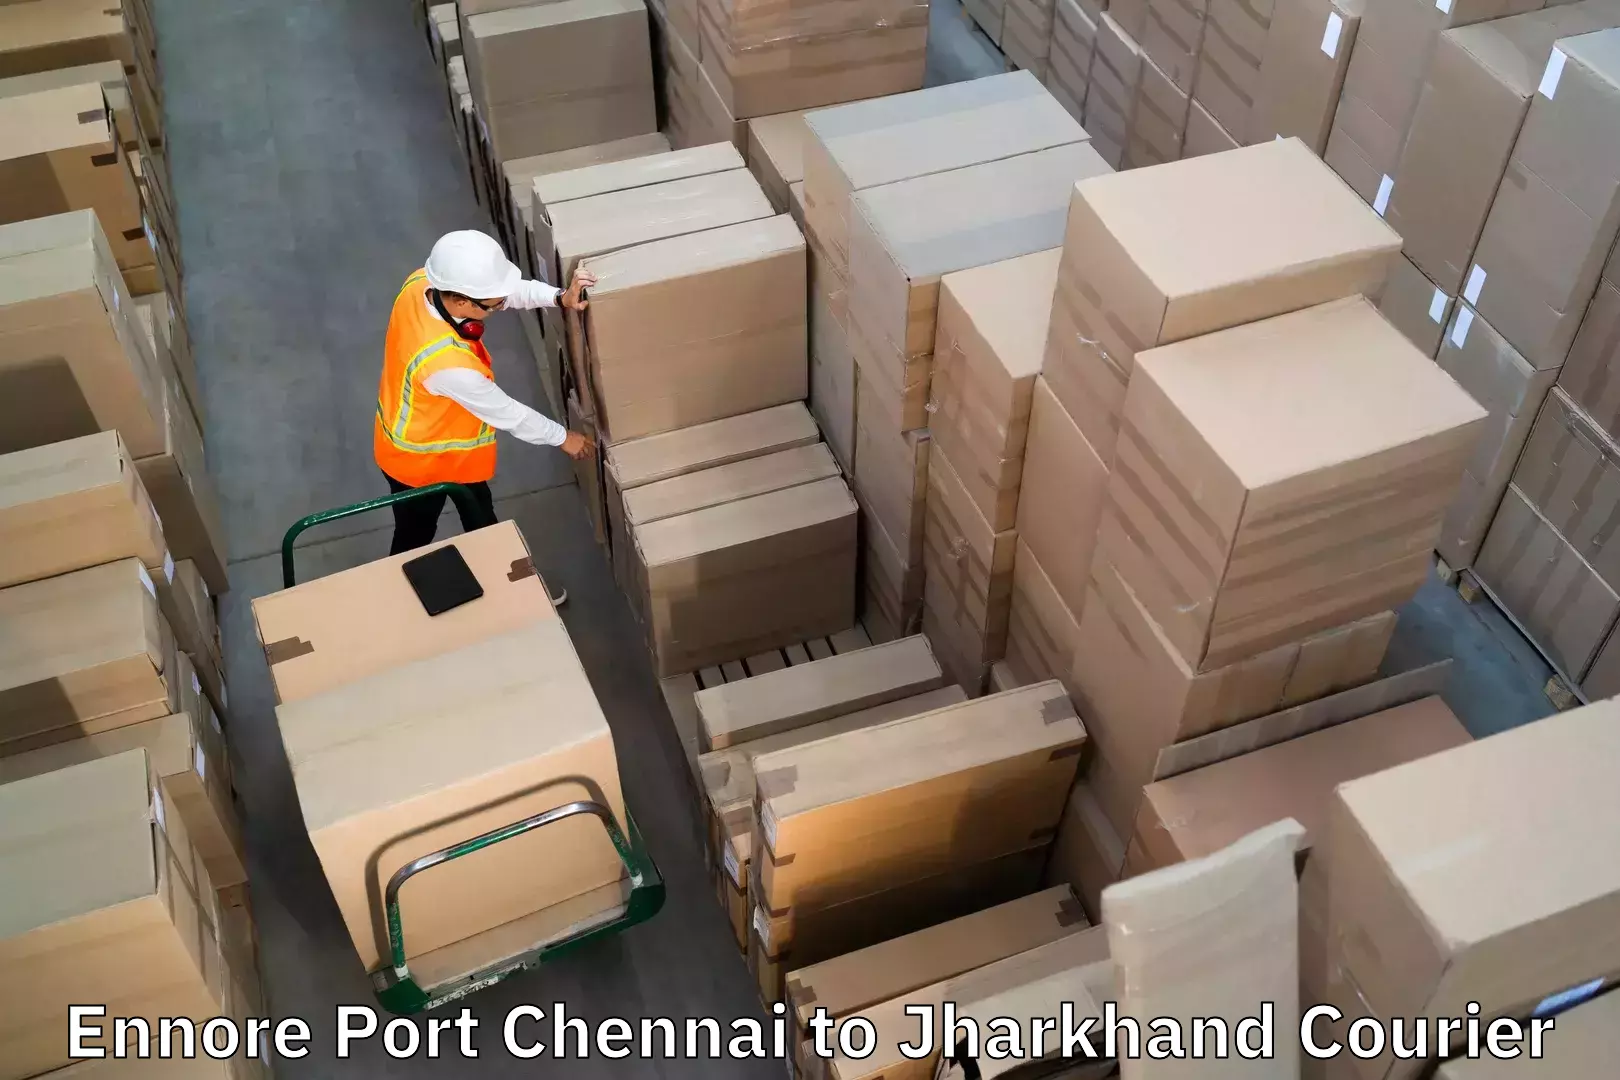 Luggage shipment specialists Ennore Port Chennai to Tamar